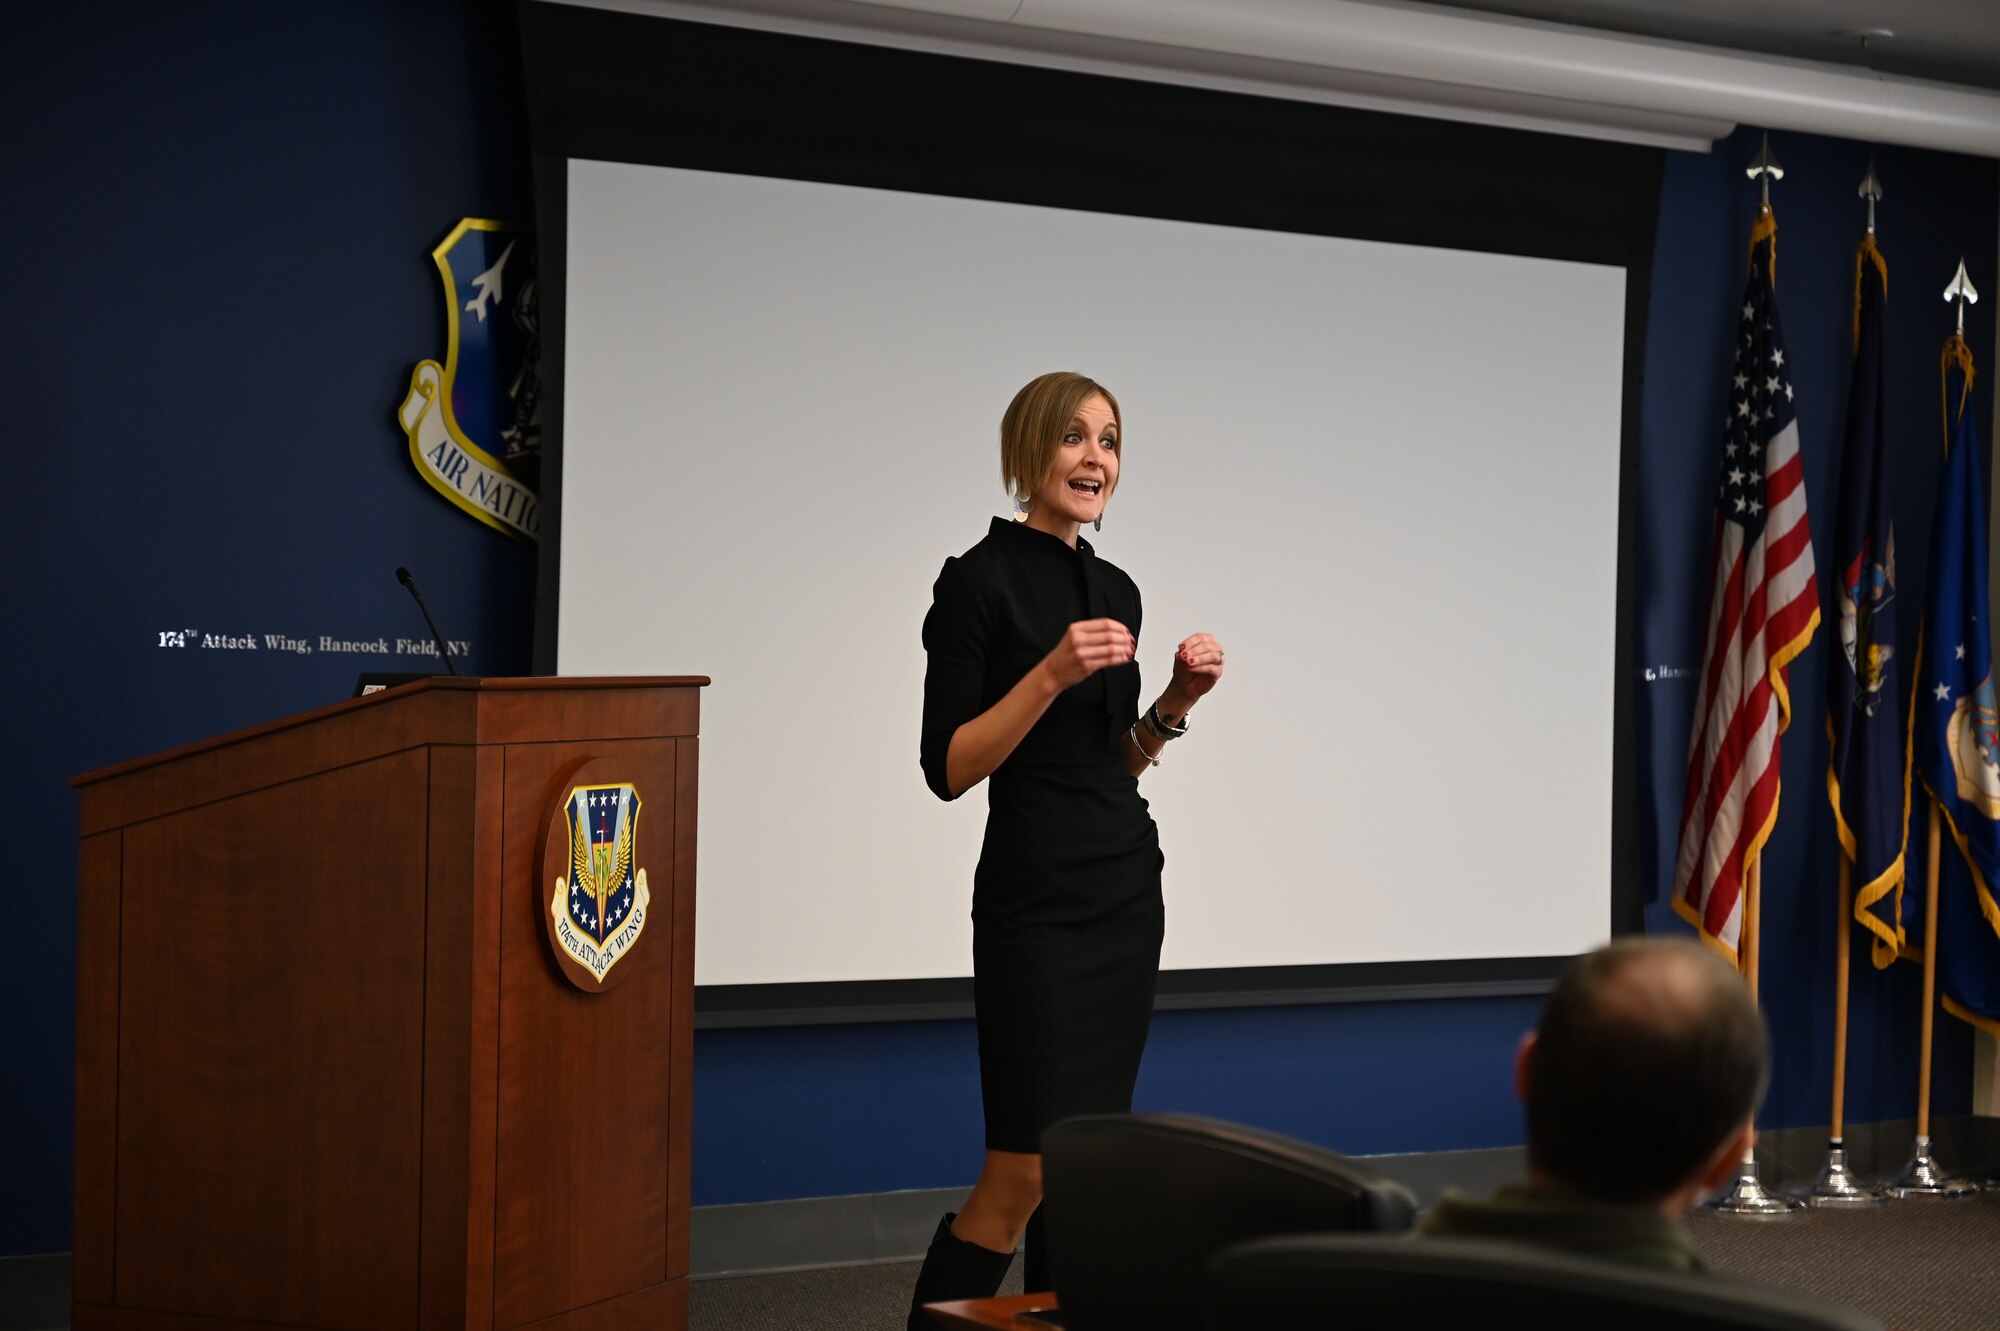 Liz Green, Executive Director of Online Student Success, speaks to members of the 174th Attack Wing during a presentation at Hancock Field Air National Guard Base February 6. The presentation highlighted educational benefits for 174th Attack Wing members. (Air National Guard photo by Staff Sgt. Duane Morgan)